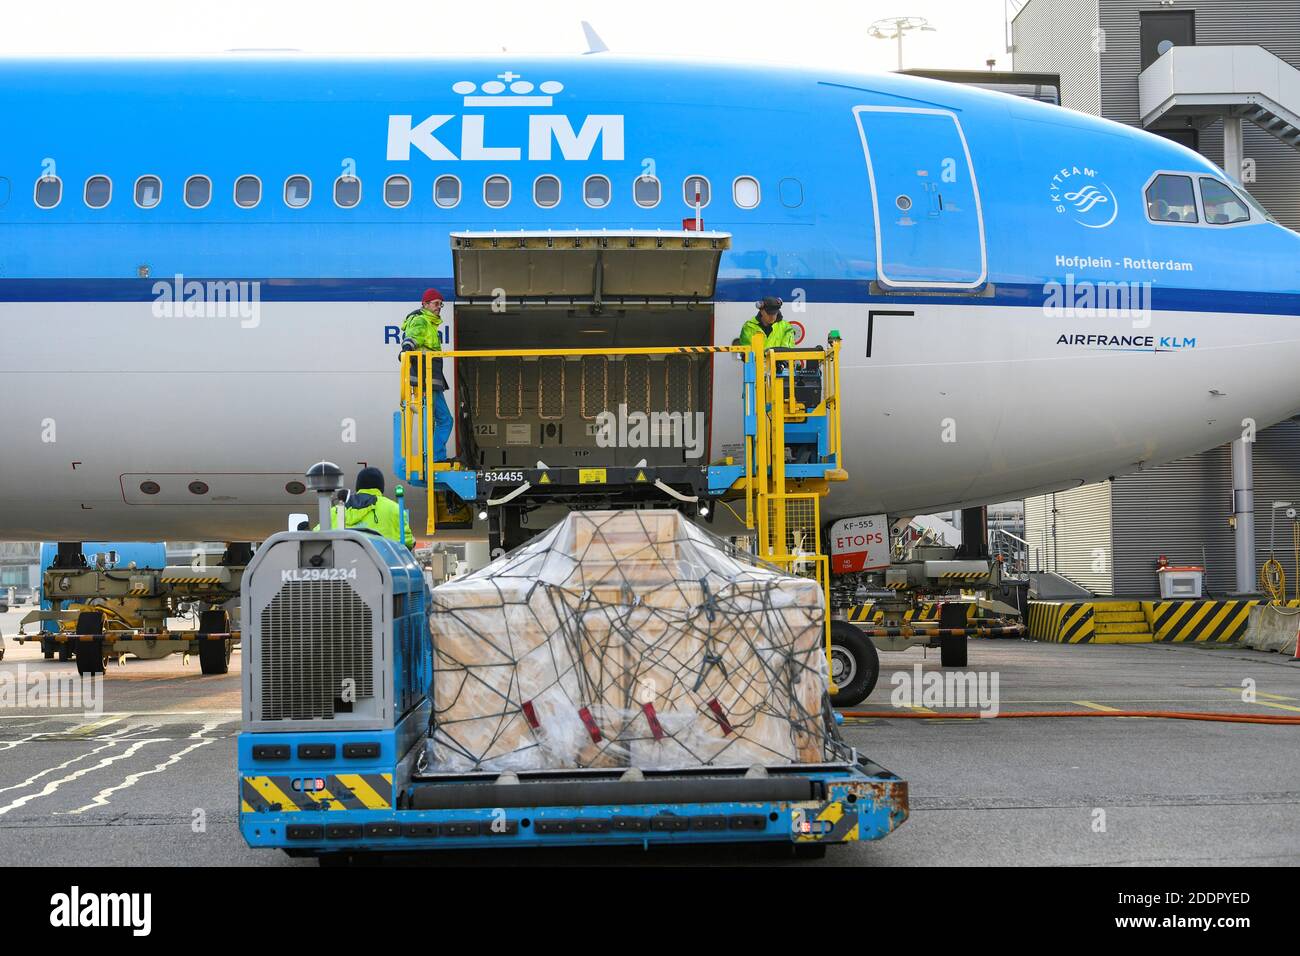 Cooled packages are being transported by airplane at the Schiphol Airport as Air France-KLM's cargo operations are preparing a massive logistical operation carrying new vaccines and vaccine candidates for COVID-19 through Amsterdam's Schiphol Airport, Netherlands November 25, 2020. Picture taken November 25, 2020. REUTERS/Piroschka van de Wouw Stock Photo